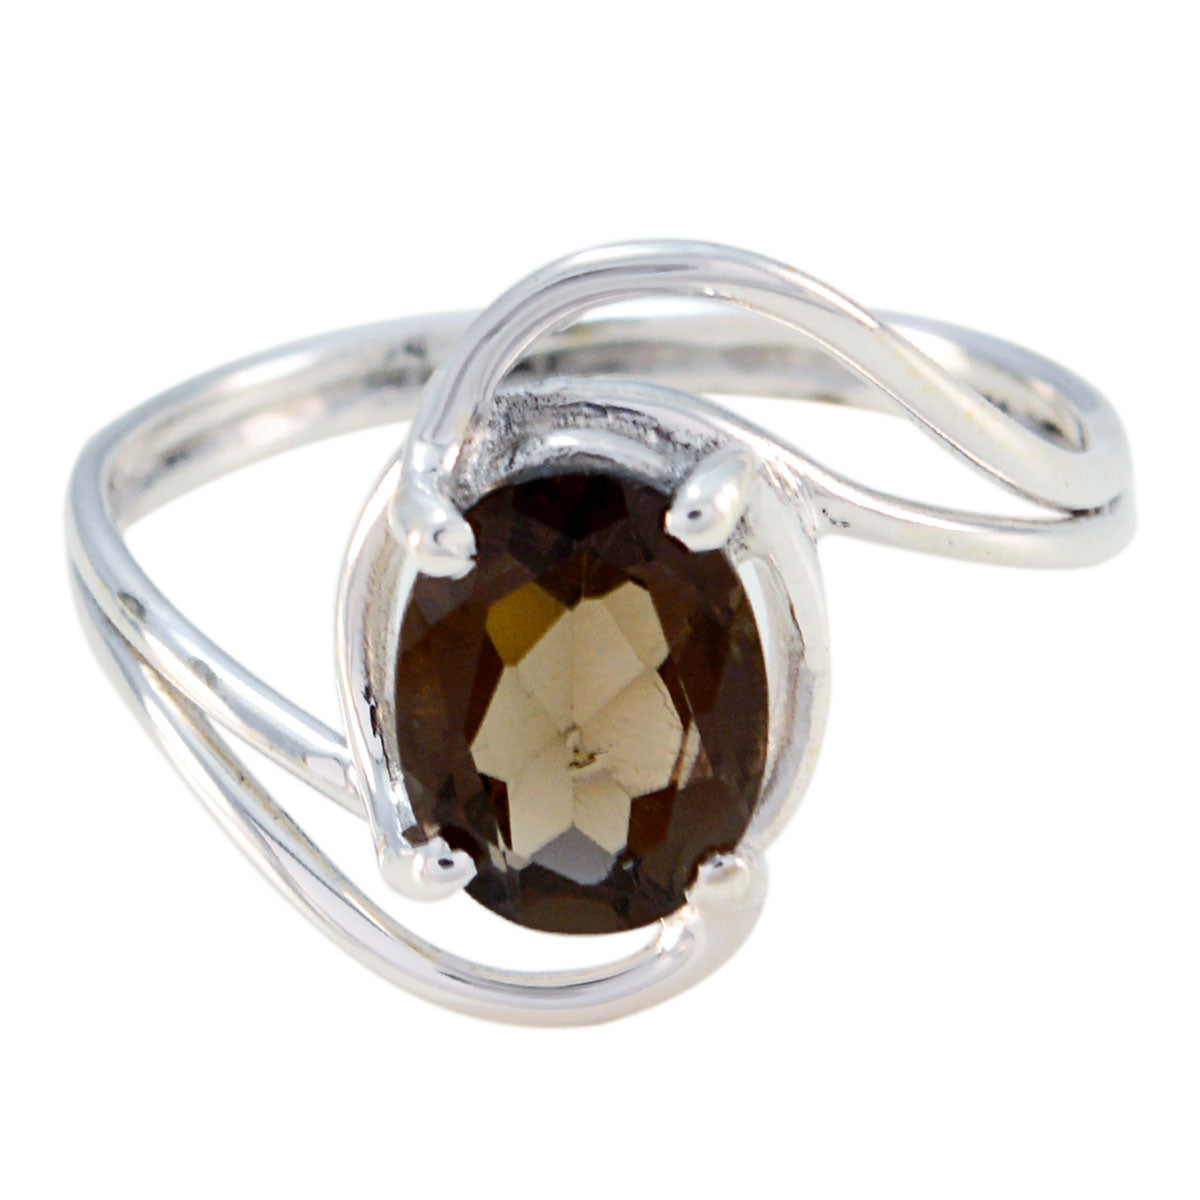 Goods Gem Smoky Quartz 925 Sterling Silver Ring Jewelry Making Tools